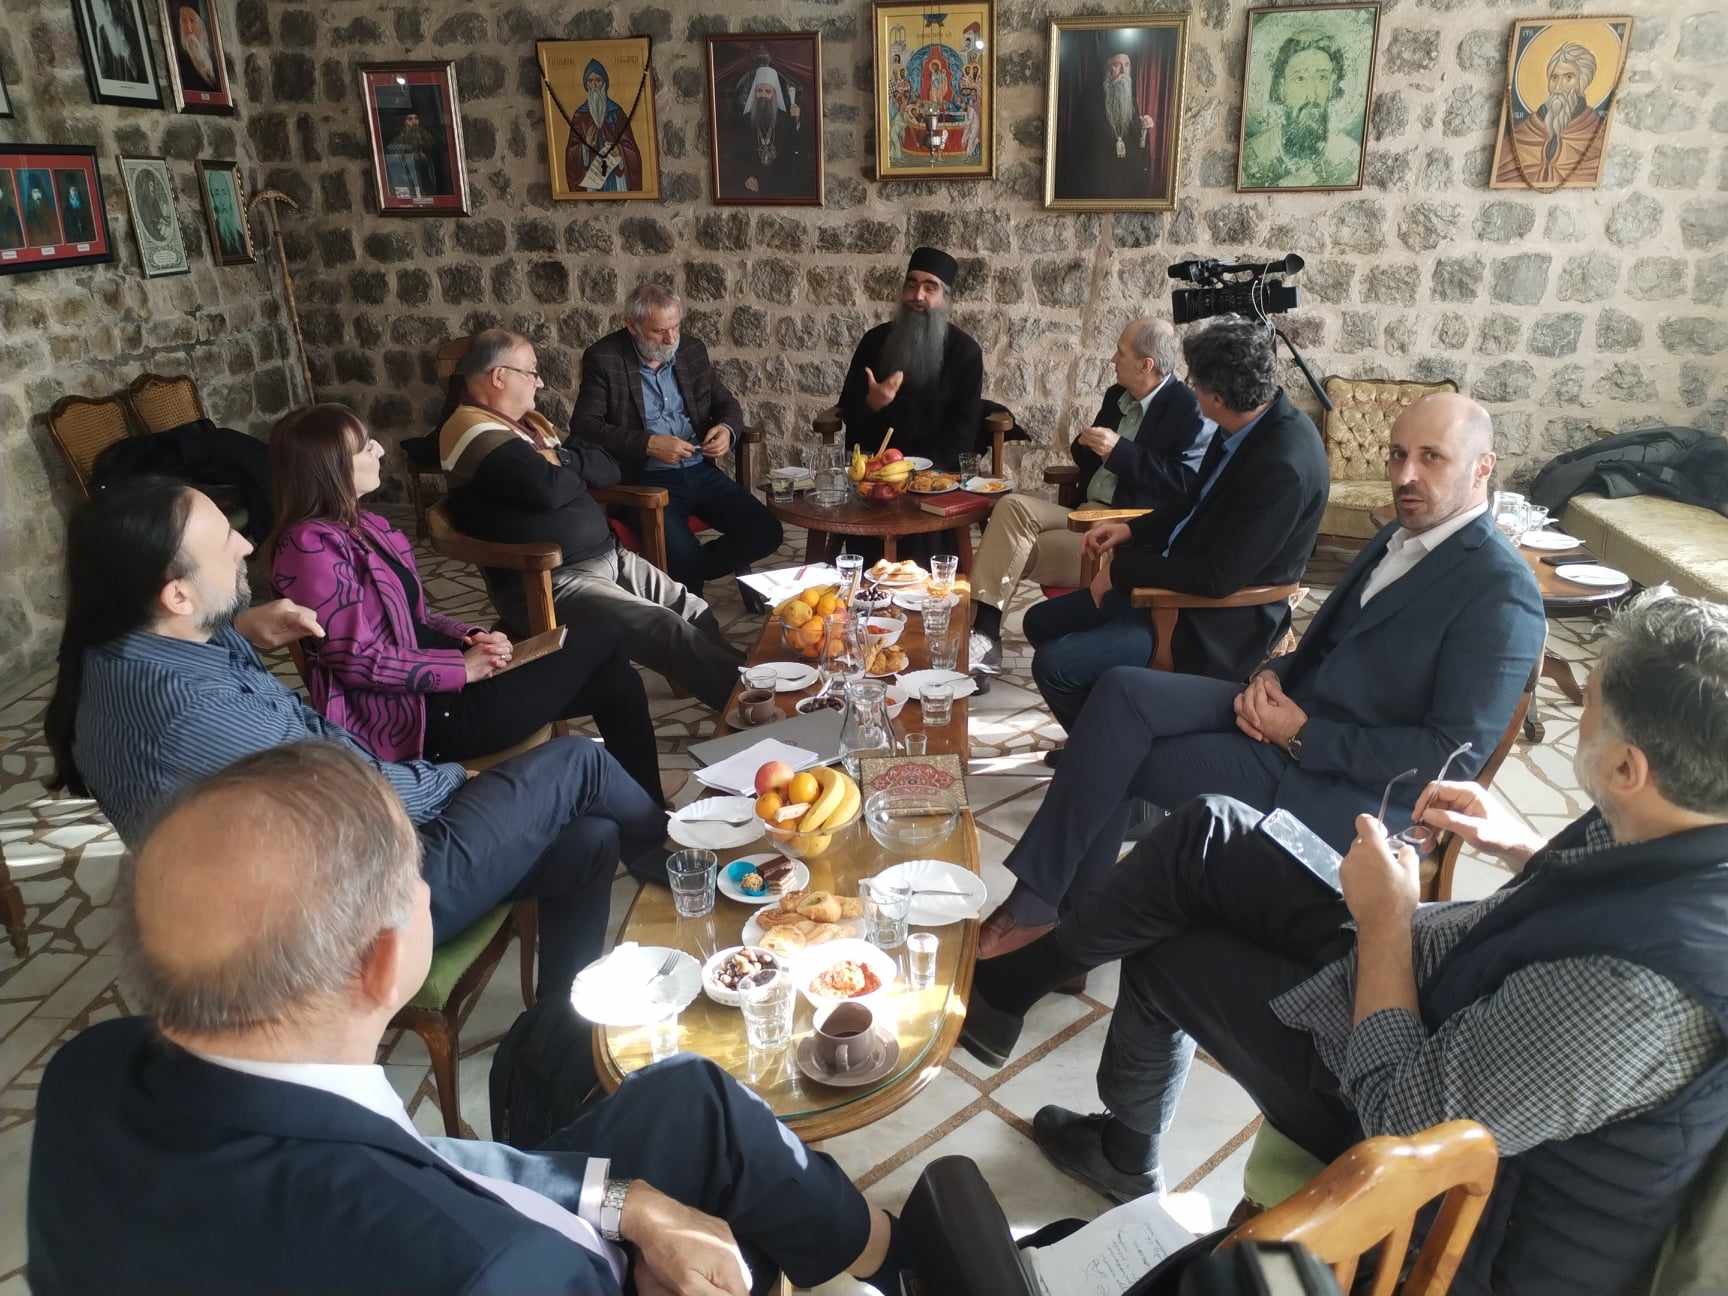 Mikonja Knežević, PhD, participated in two roundtable discussions in Budva